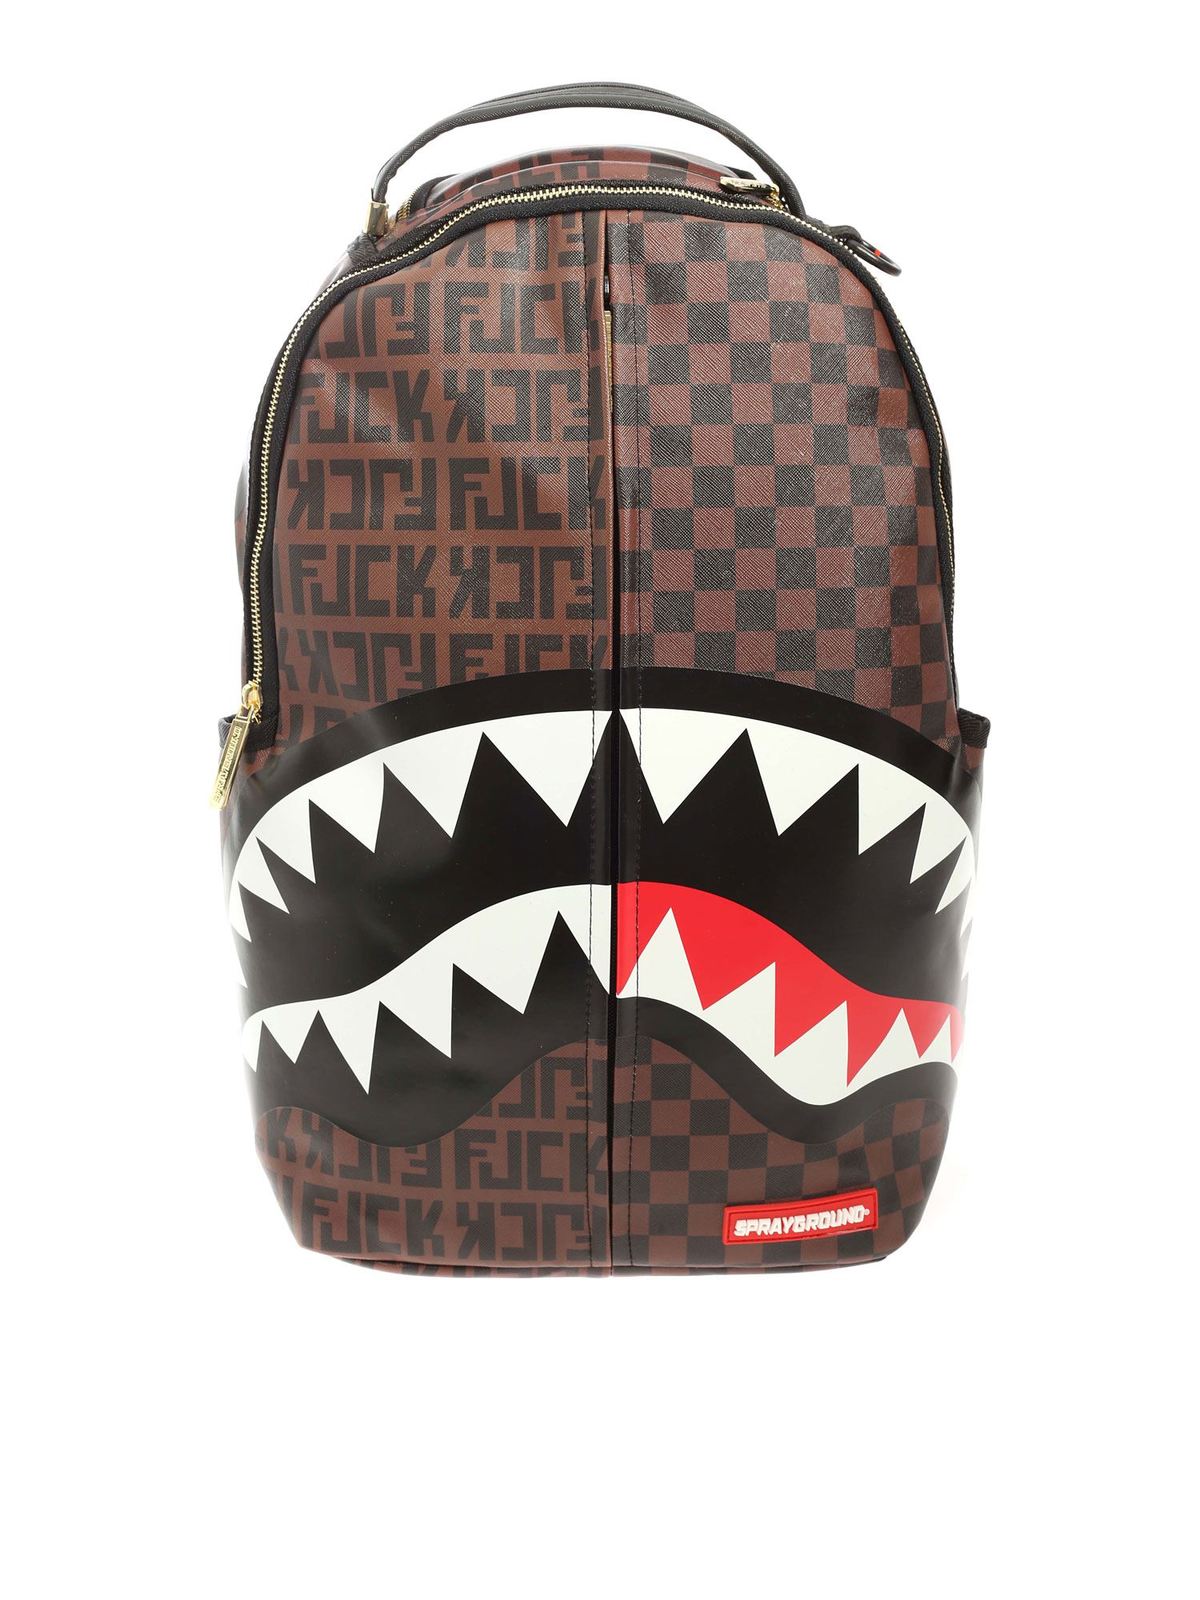 Backpacks Sprayground - Split The Check backpack in black and brown ...